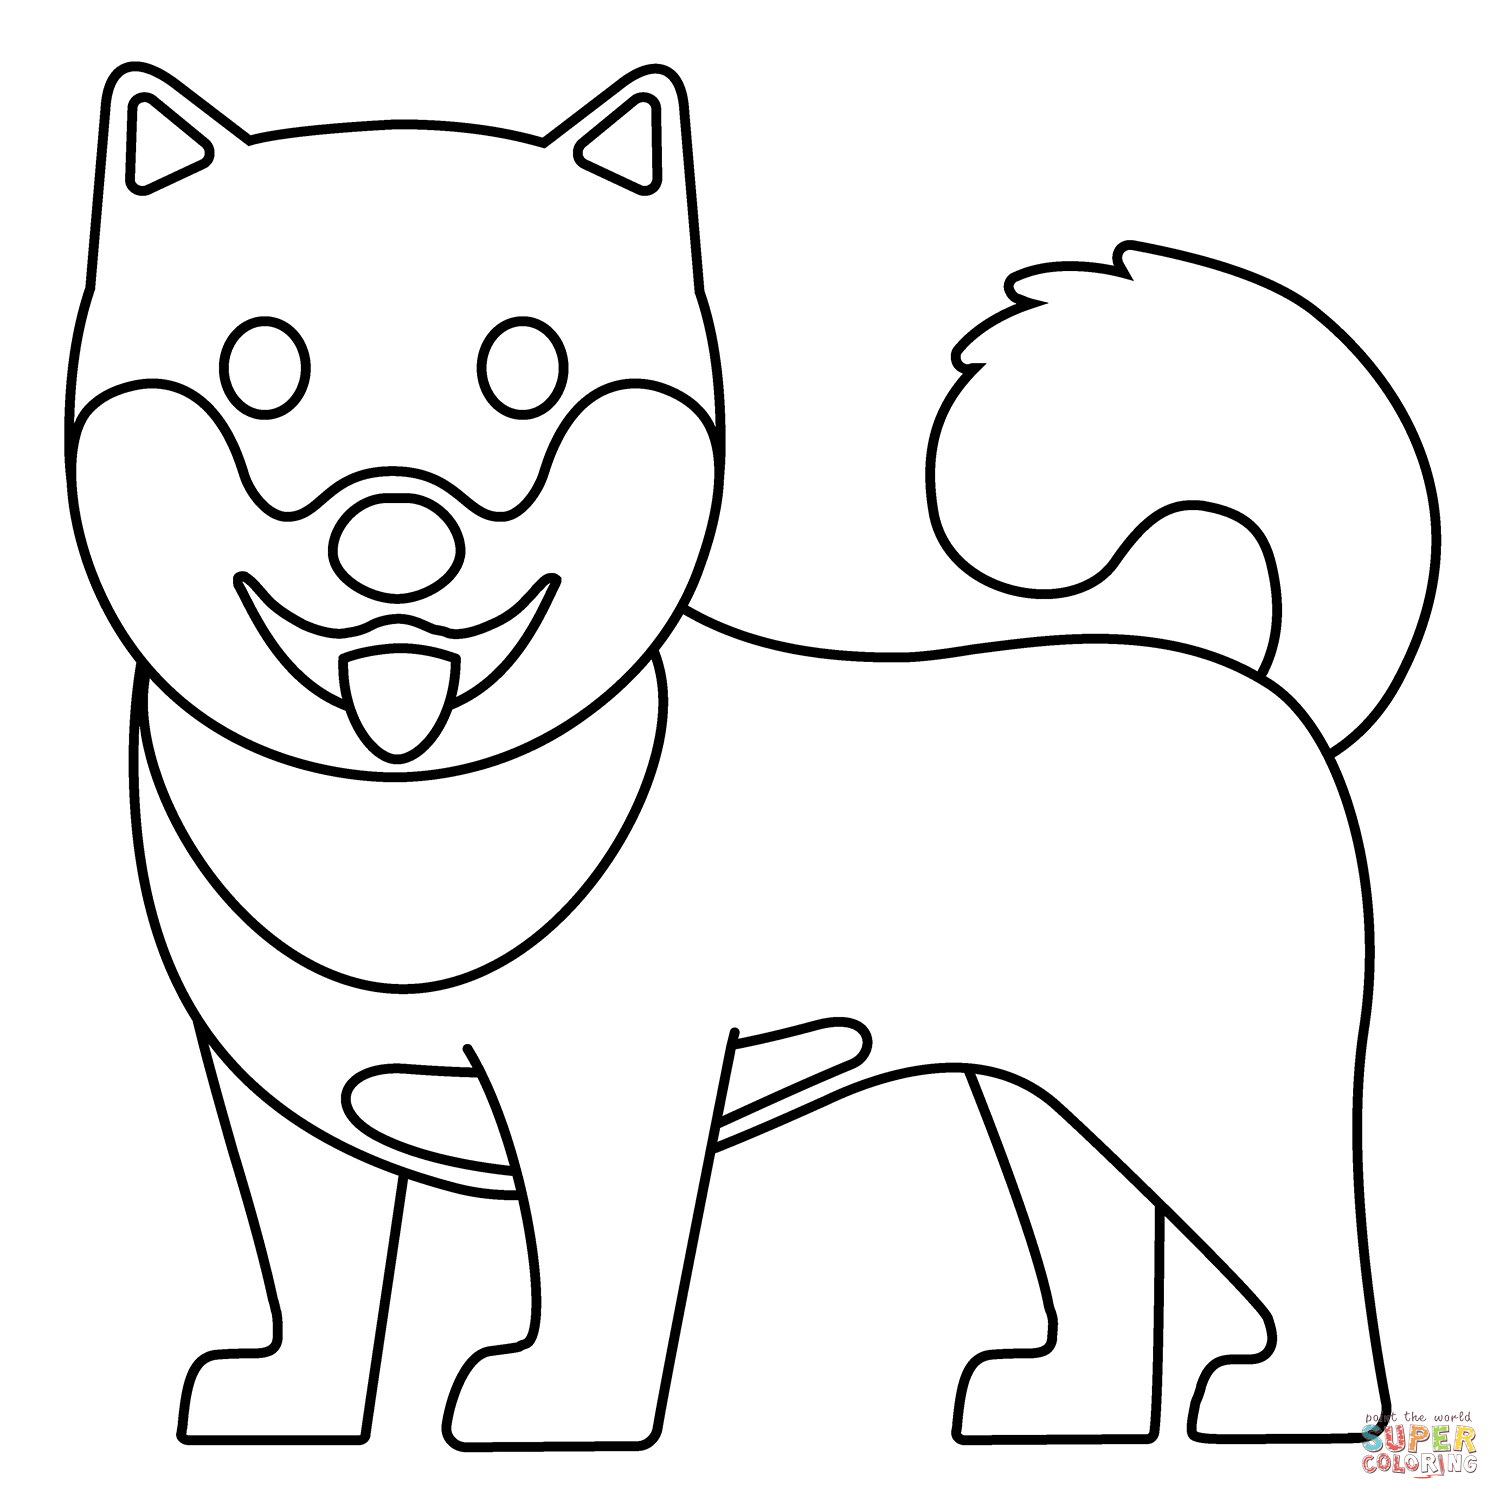 Dog emoji coloring page free printable coloring pages